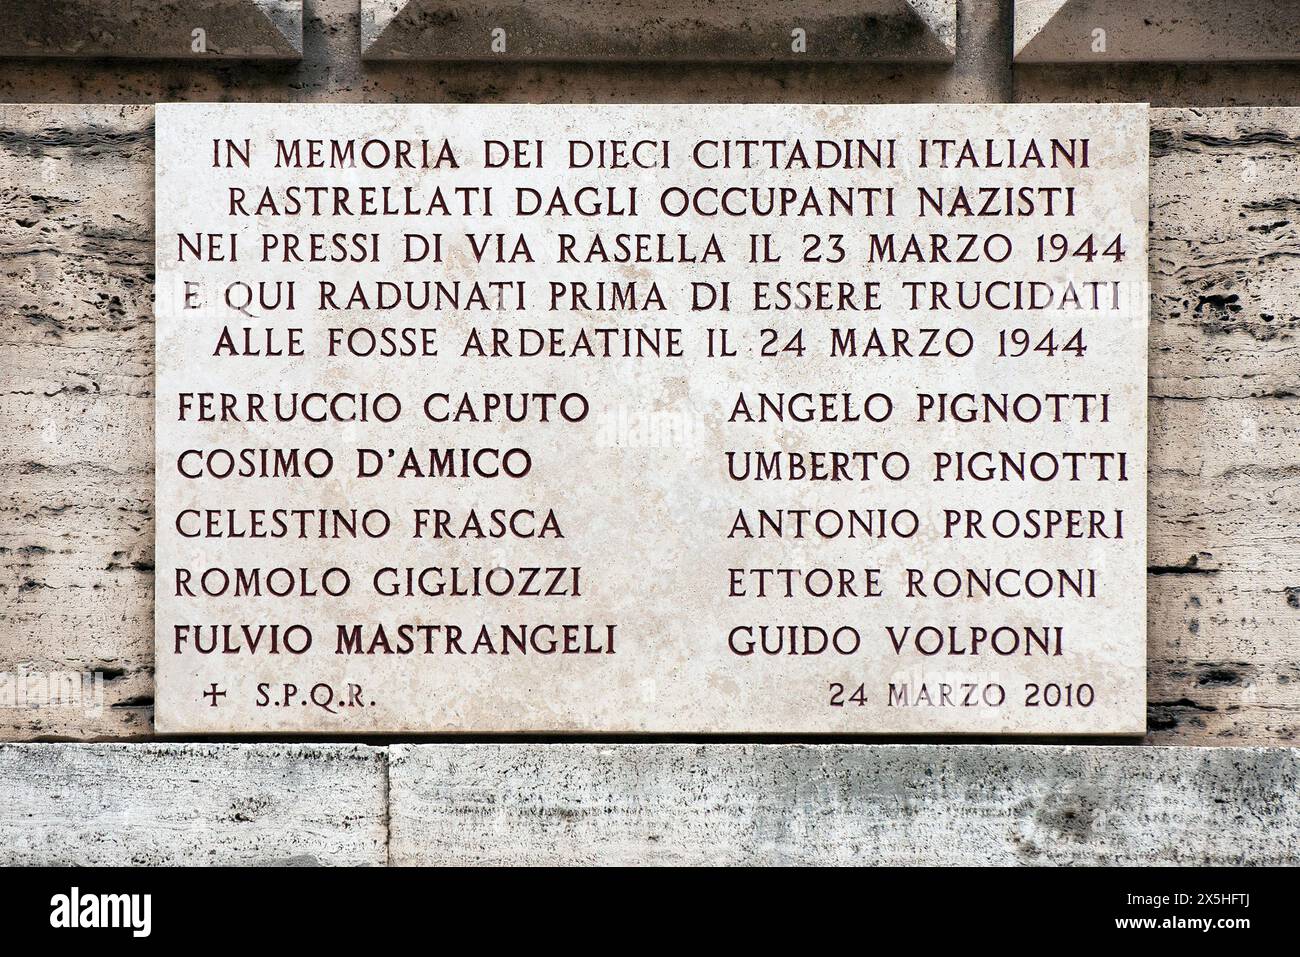 Plaque in memory of the ten Italian people arrested near via Rasella and killed at the Fosse Ardeatine in 1944, Via delle Quattro Fontane, Rome, Italy Stock Photo